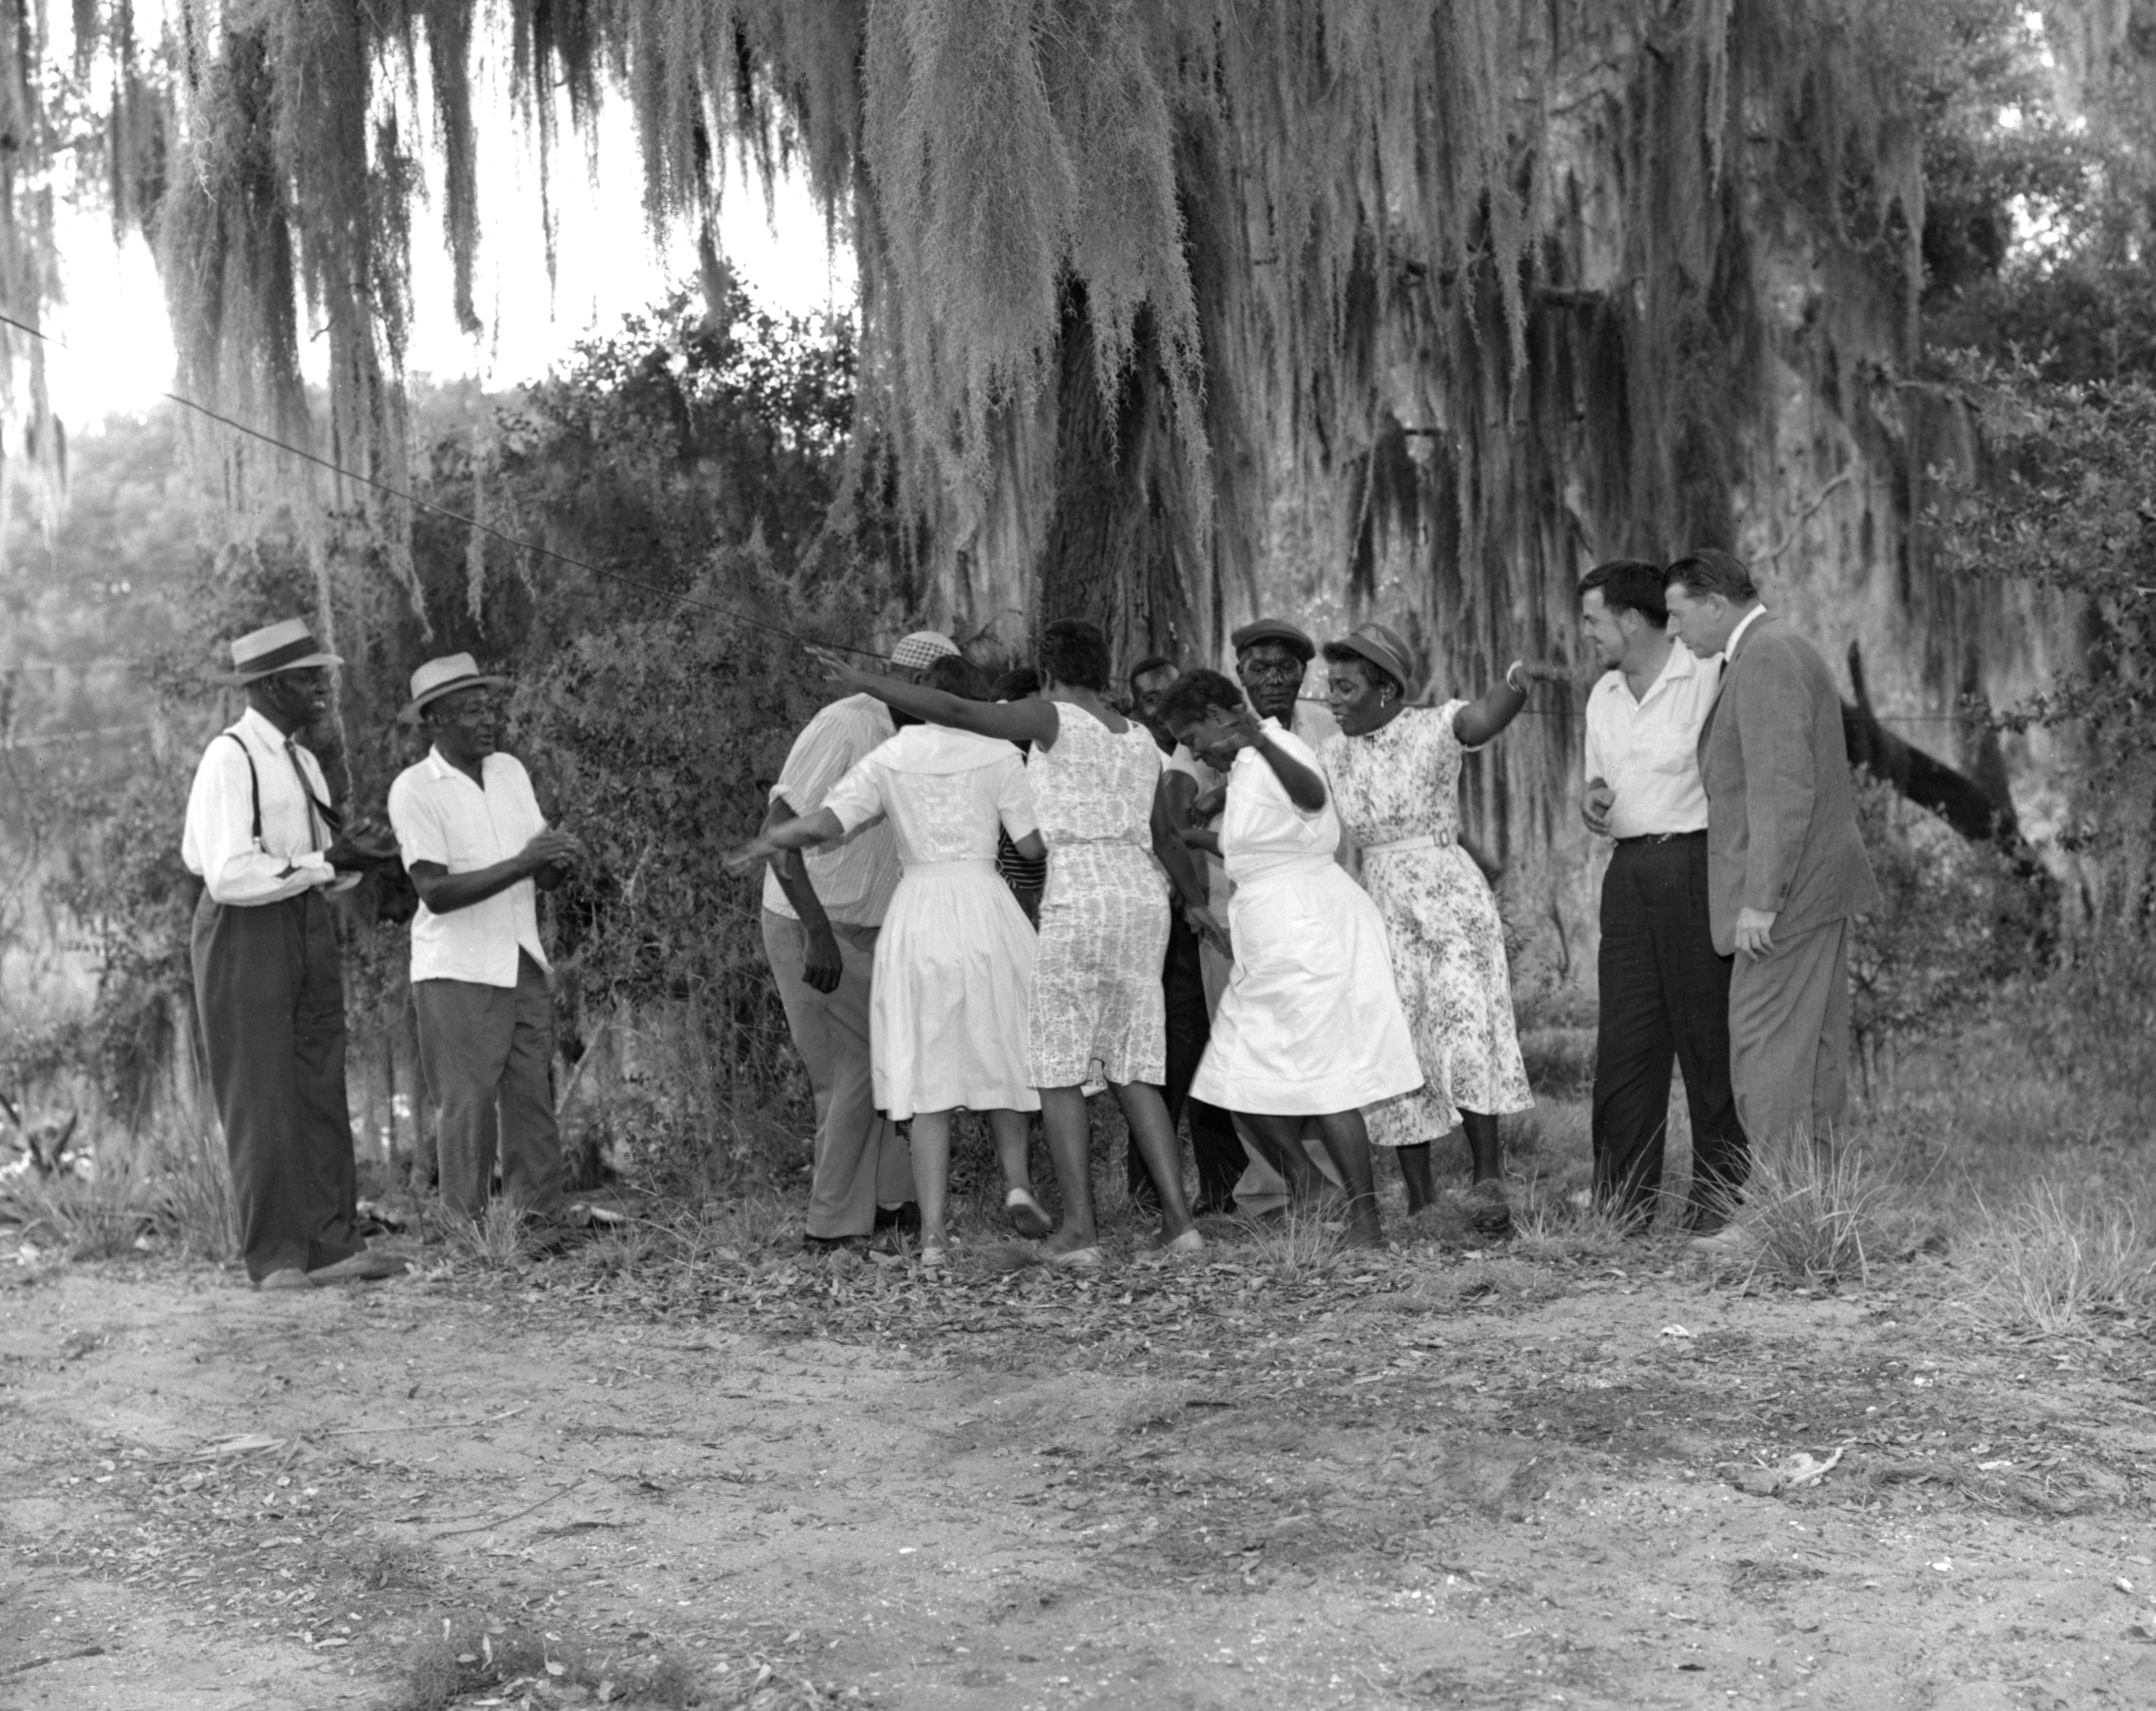 Ethnomusicologist Alan Lomax (second from right) met Bessie Jones when he came to St. Simons Island to record the Spiritual Singers Society of Coastal Georgia.